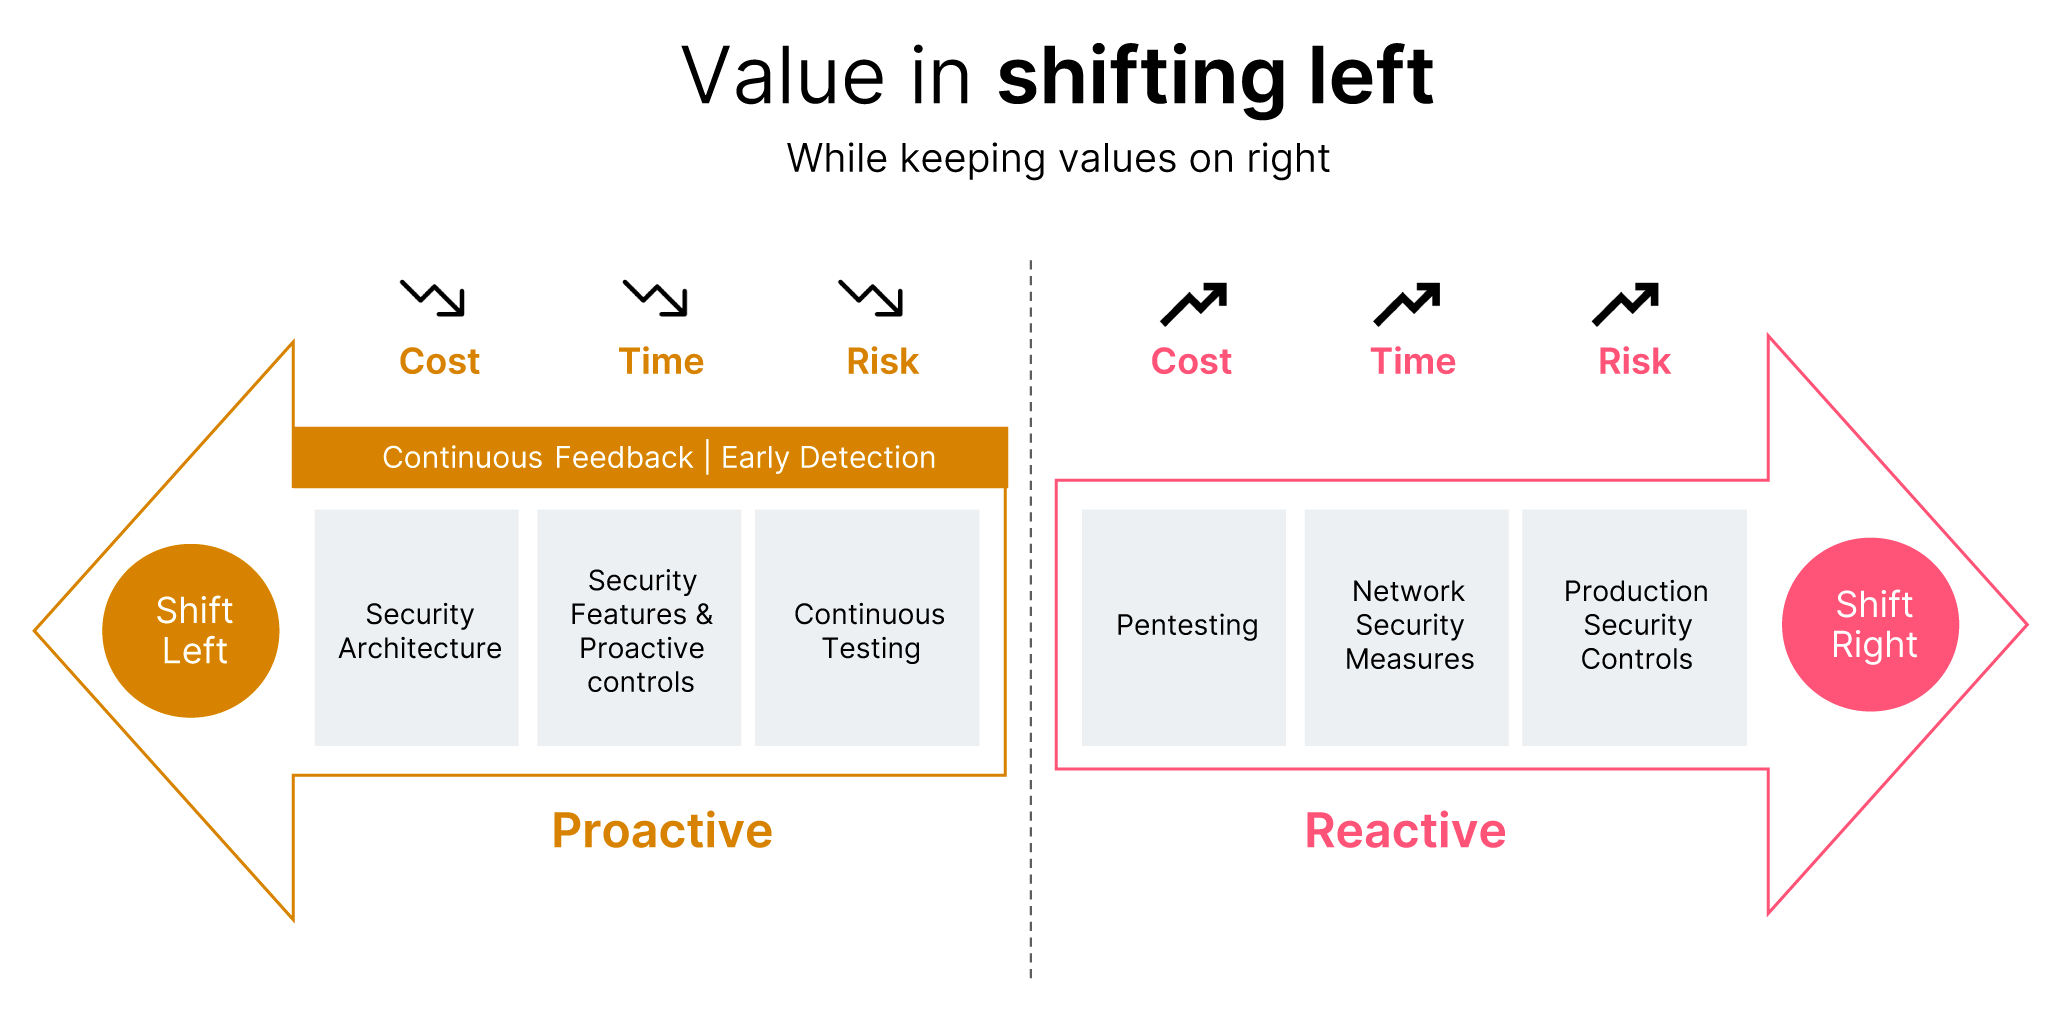 Diagram showcasing the value in shifting lift.  Left: shows the proactive / shift left approach which involves continuous feedback and early detection and investing in security architecture, security features & proactive controls and continuous testing. This helps reduce cost, time and risk. Right: Reactive / shift right approach requires pentesting, network security measures and production security controls - this inevitably increases cost, time and risk.